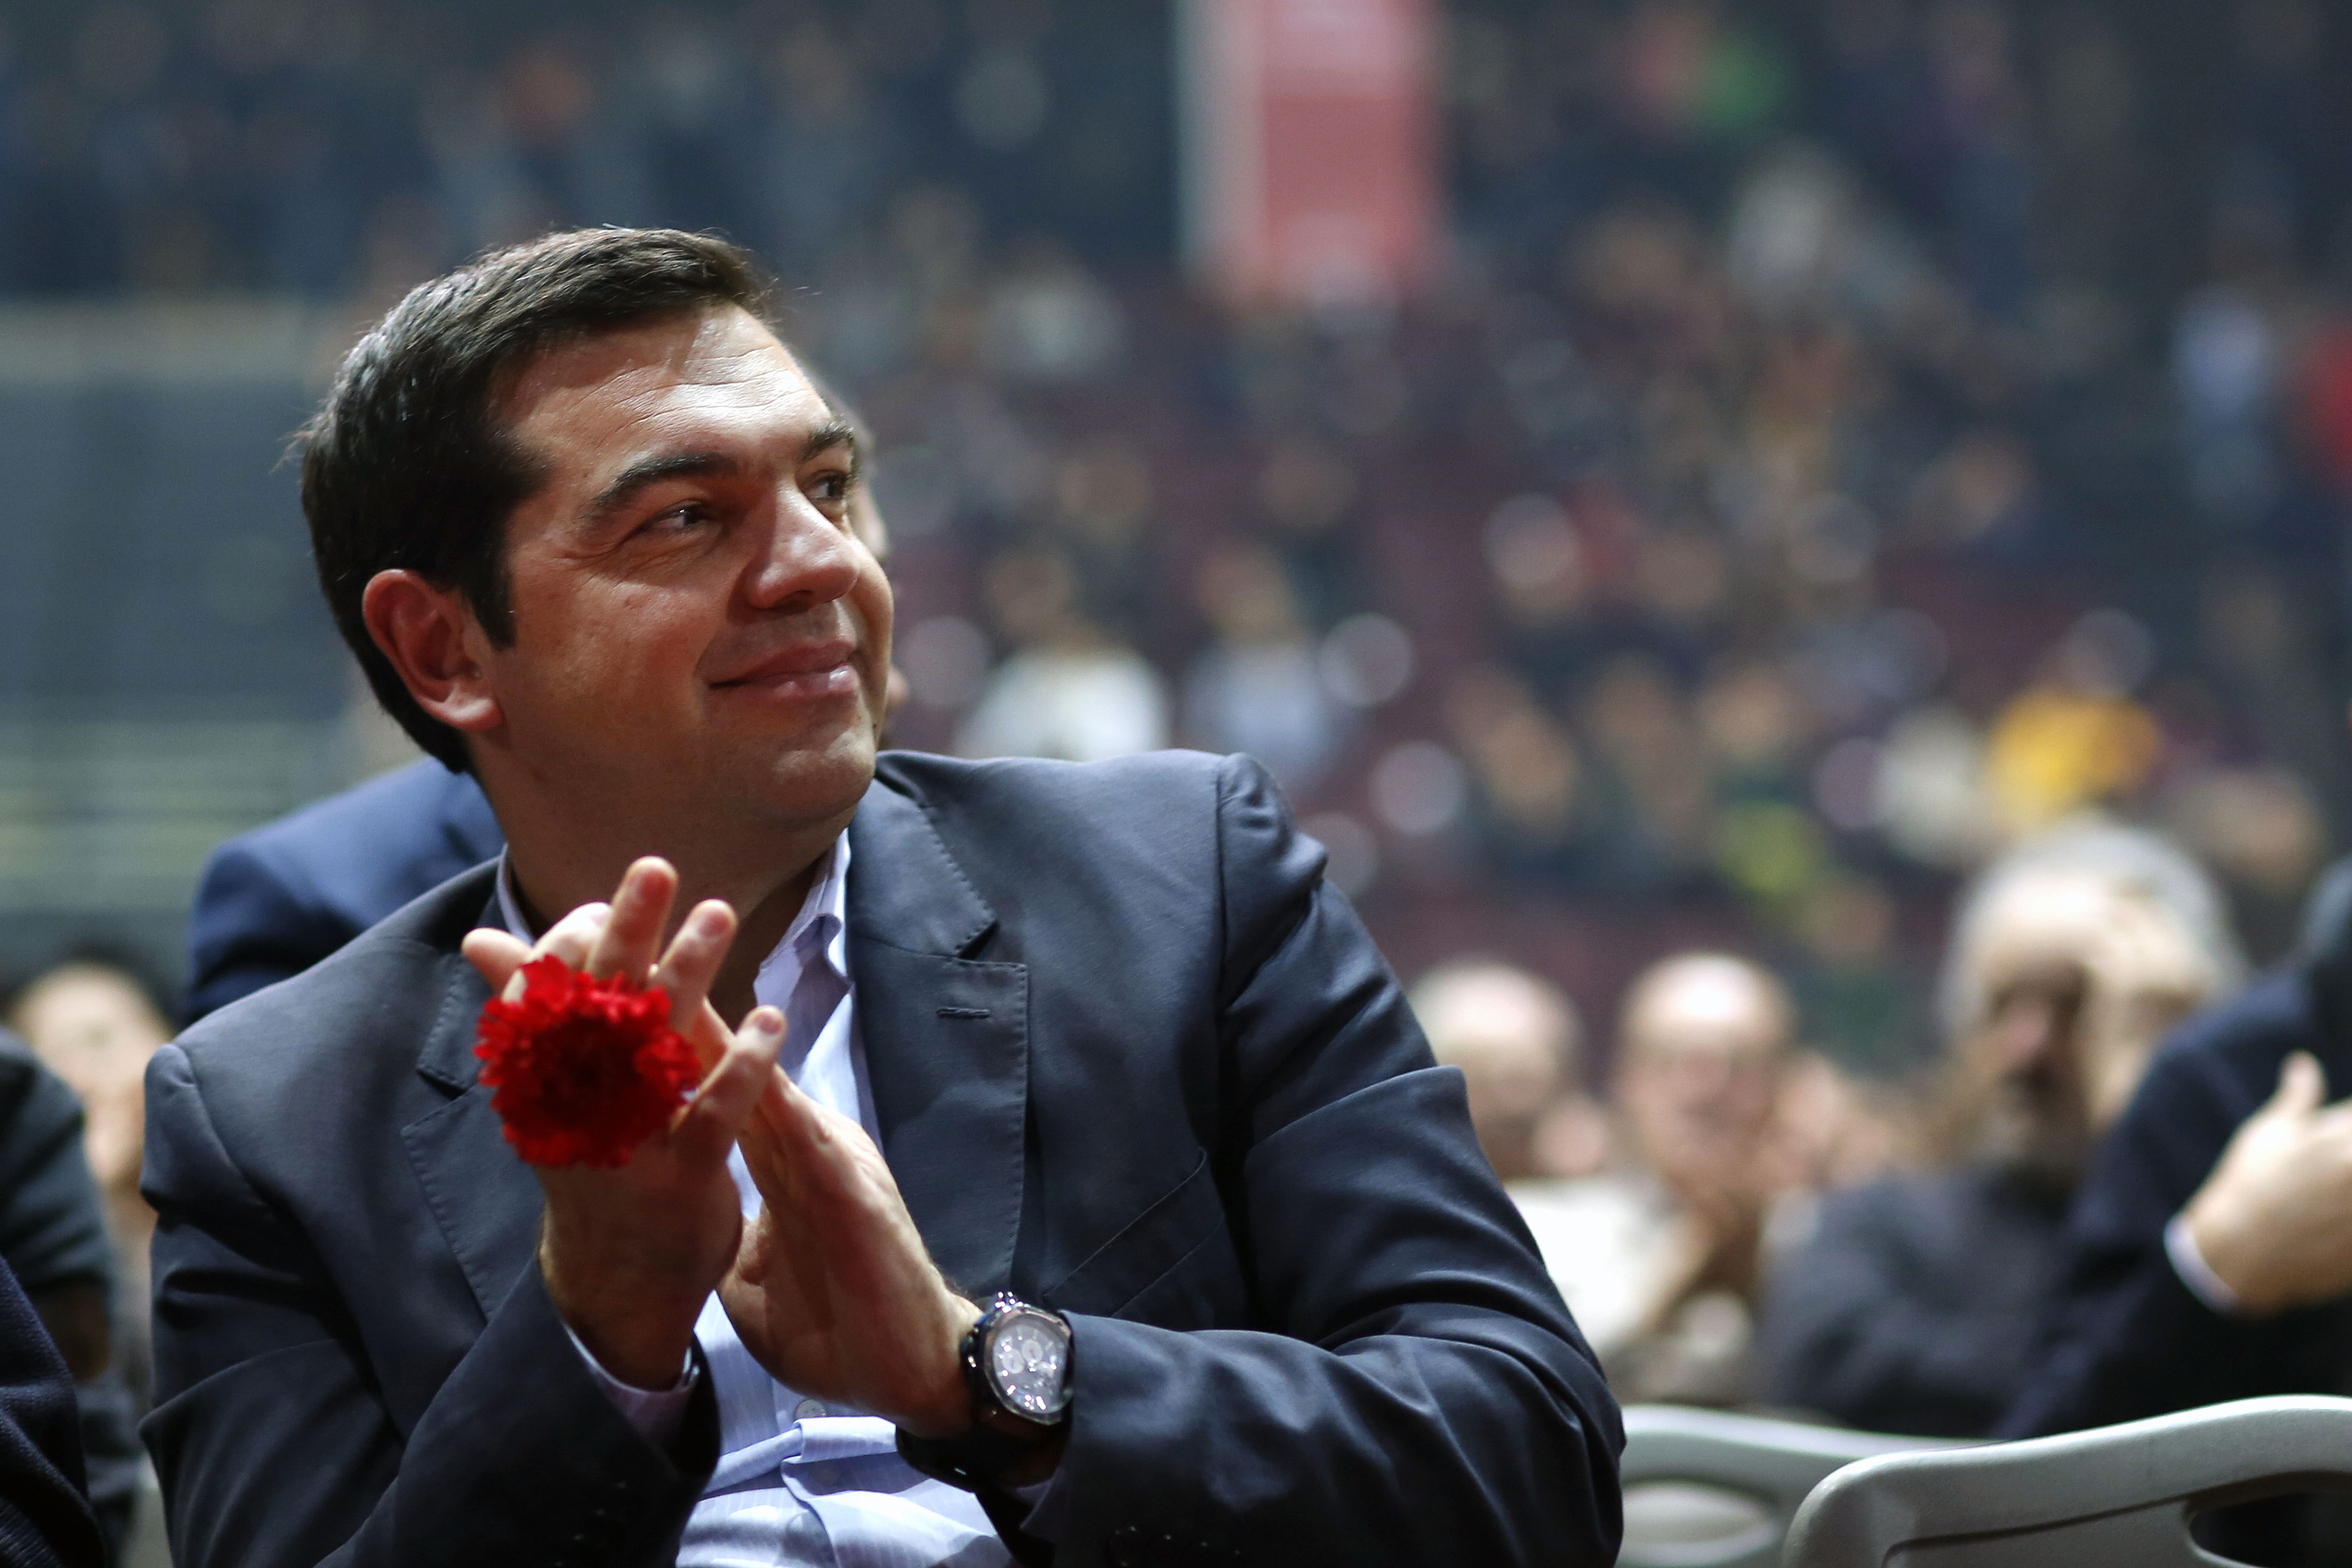 Alexis Tsipras, leader of the Syriza party. Photo: Bloomberg